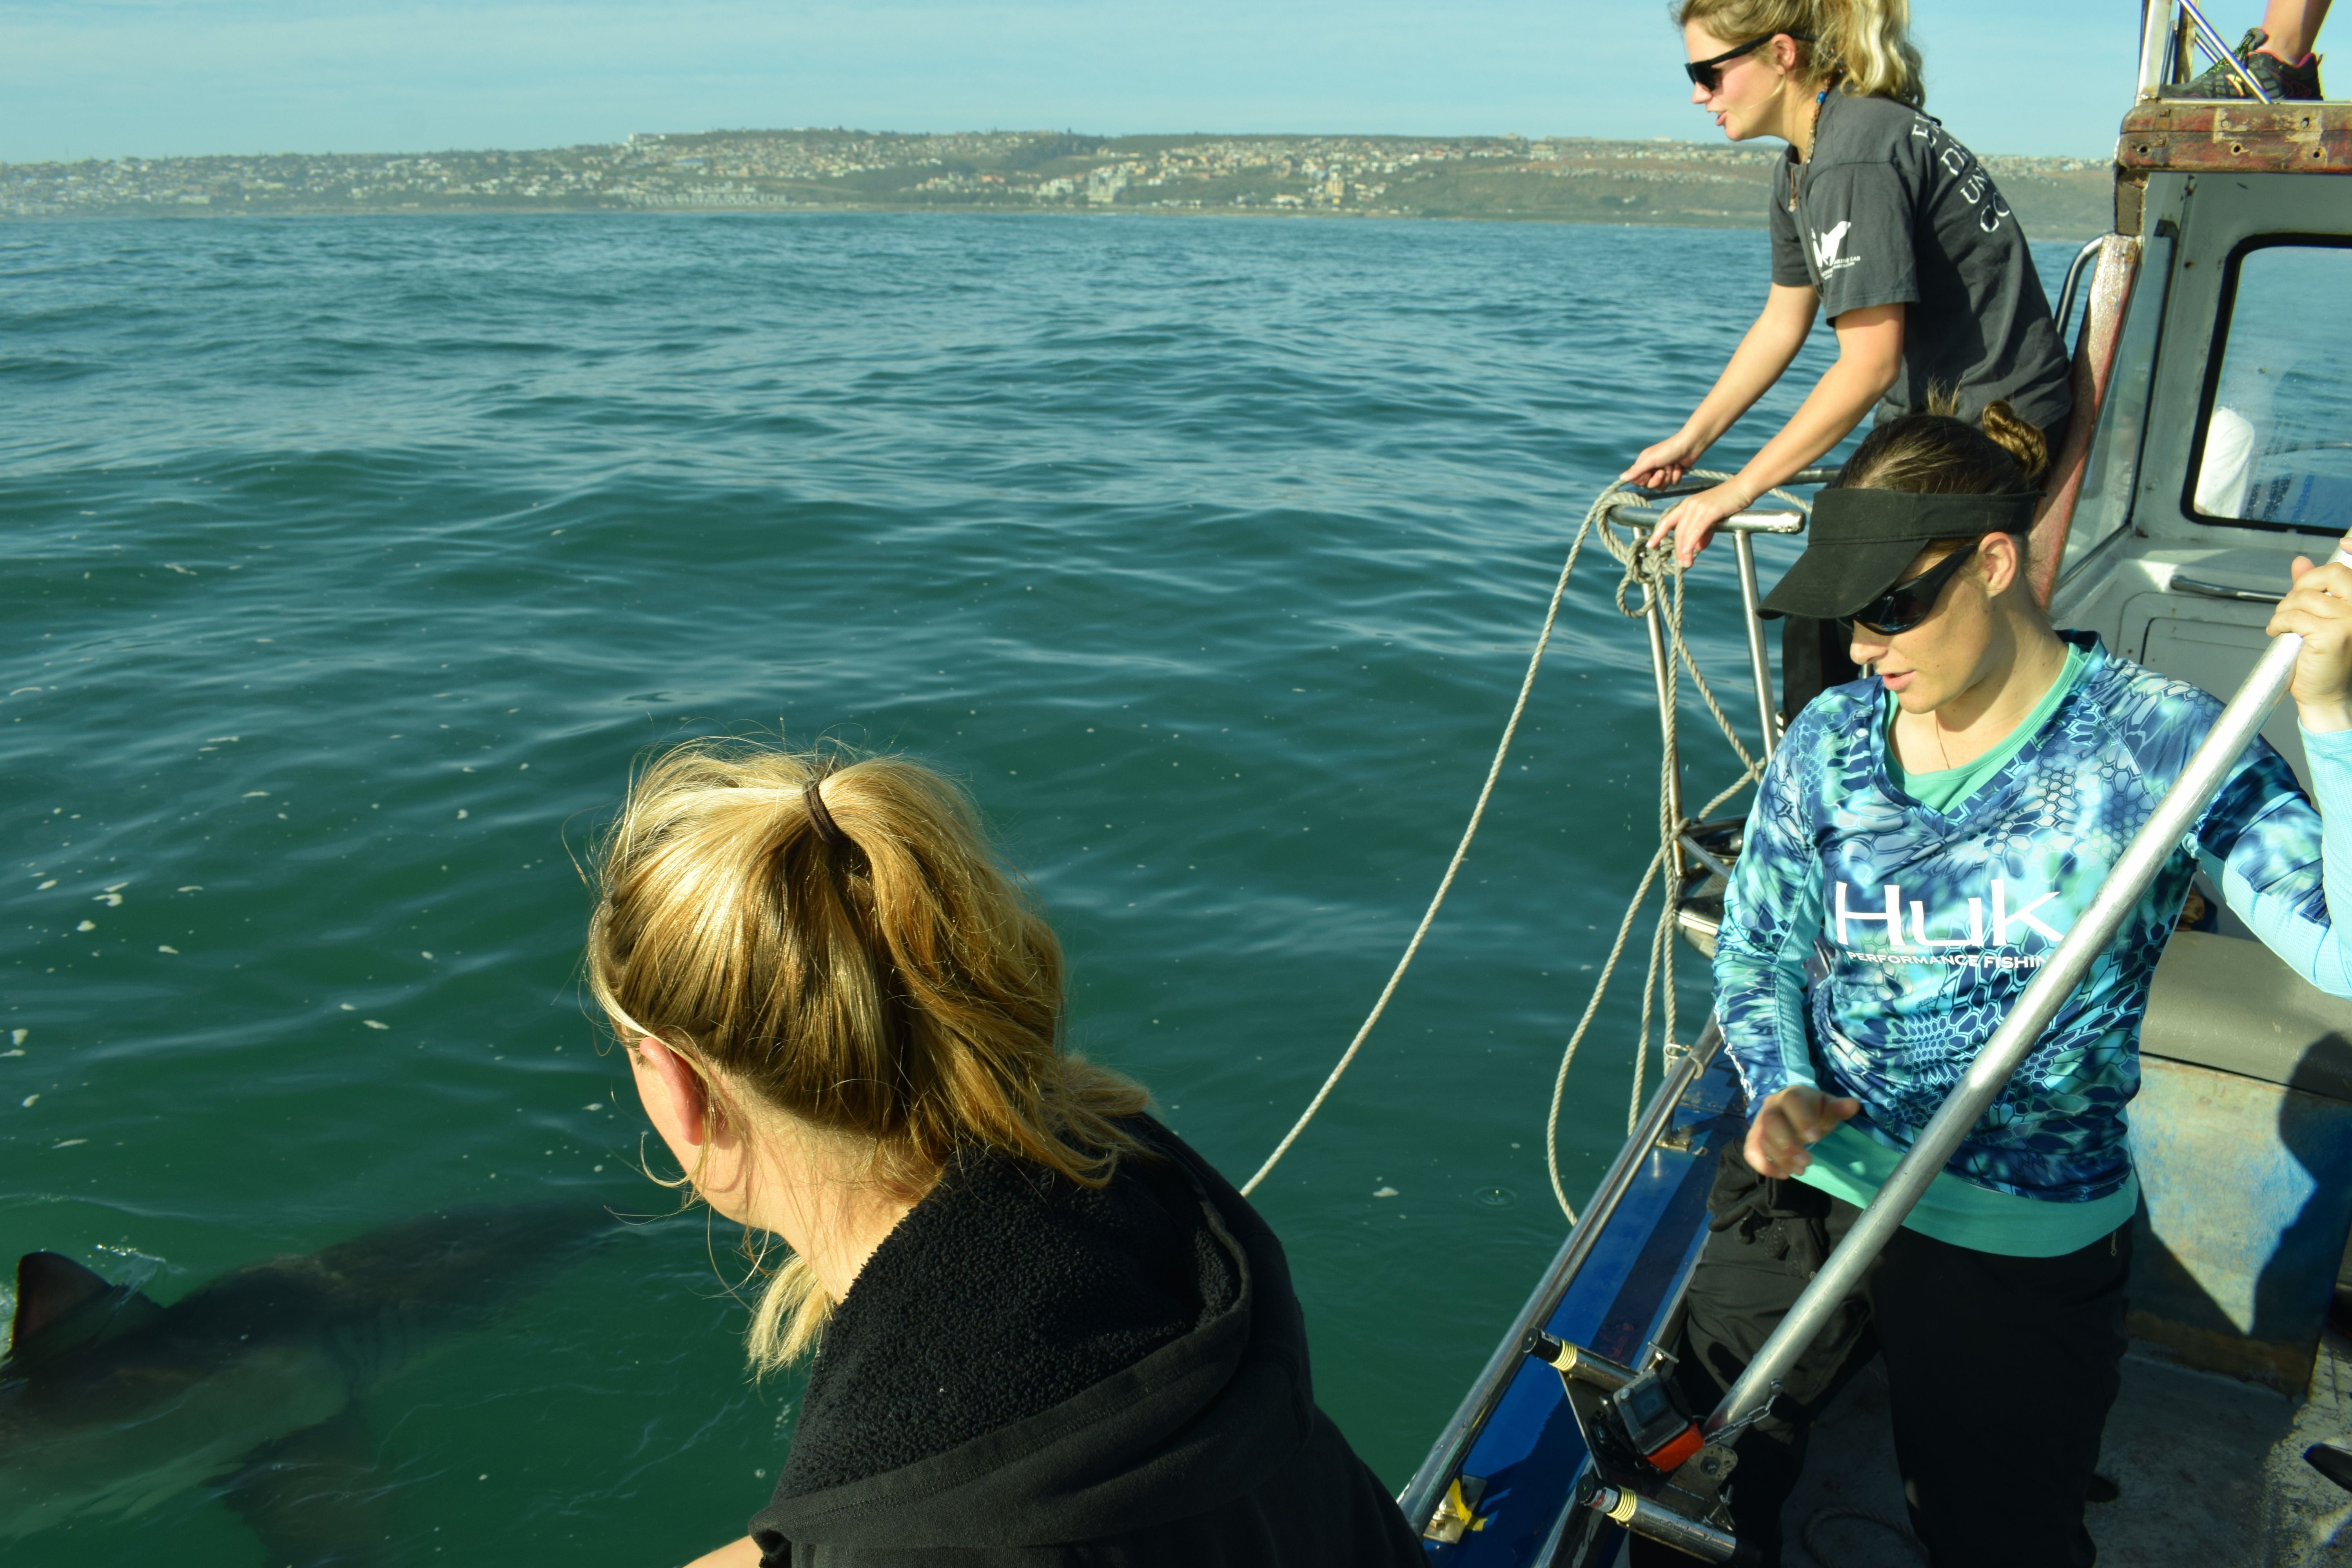 Our interview with Nelson Mandela University Marine Conservation Student, Erin Slattery